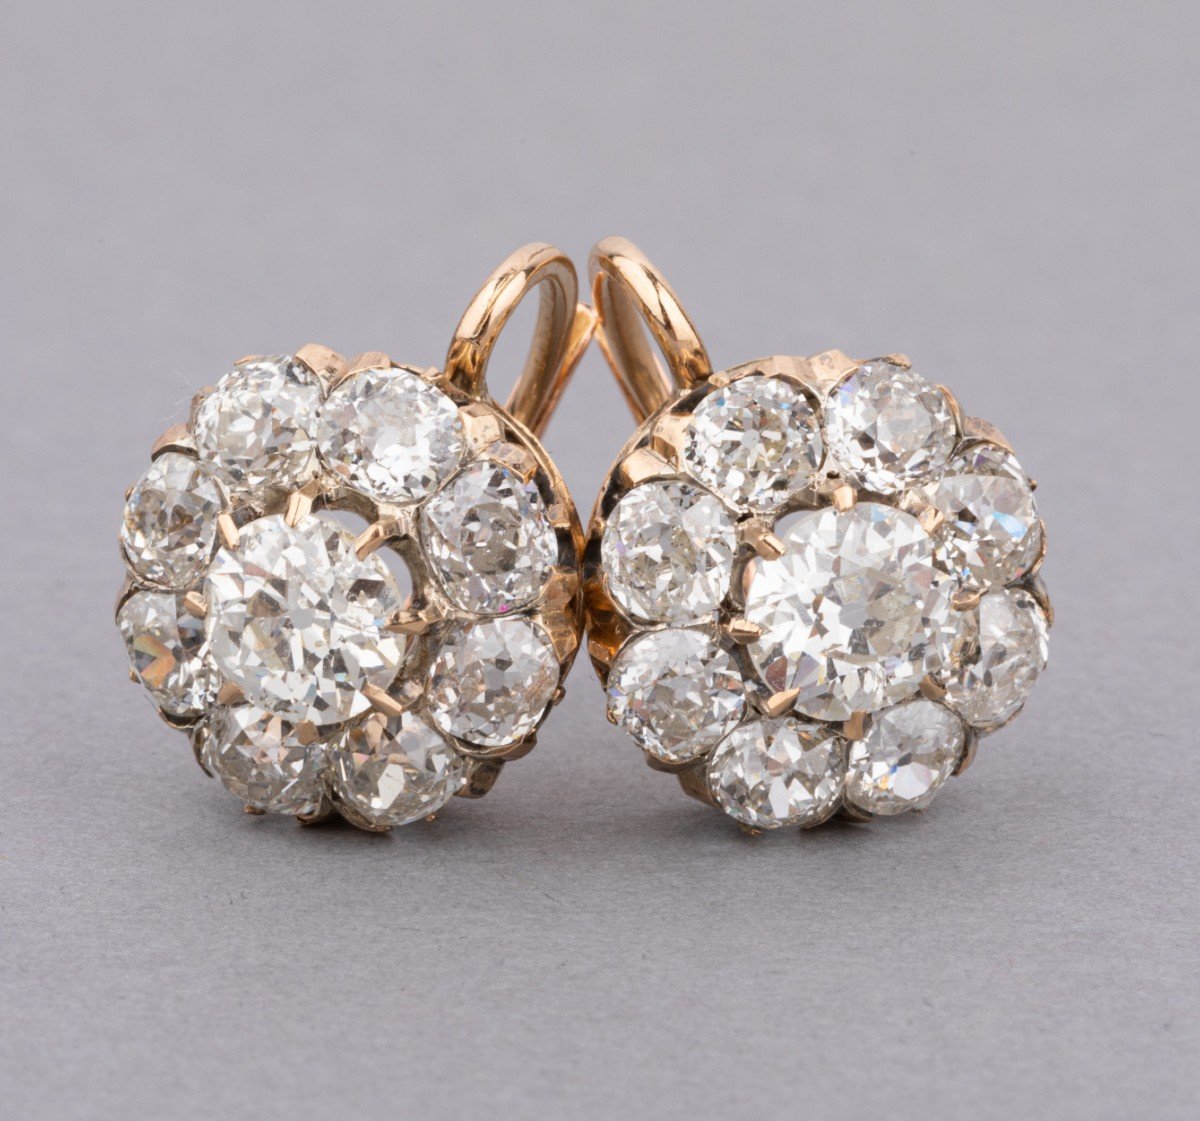 Antique Earrings Set With 5.60 Carats Of Diamonds